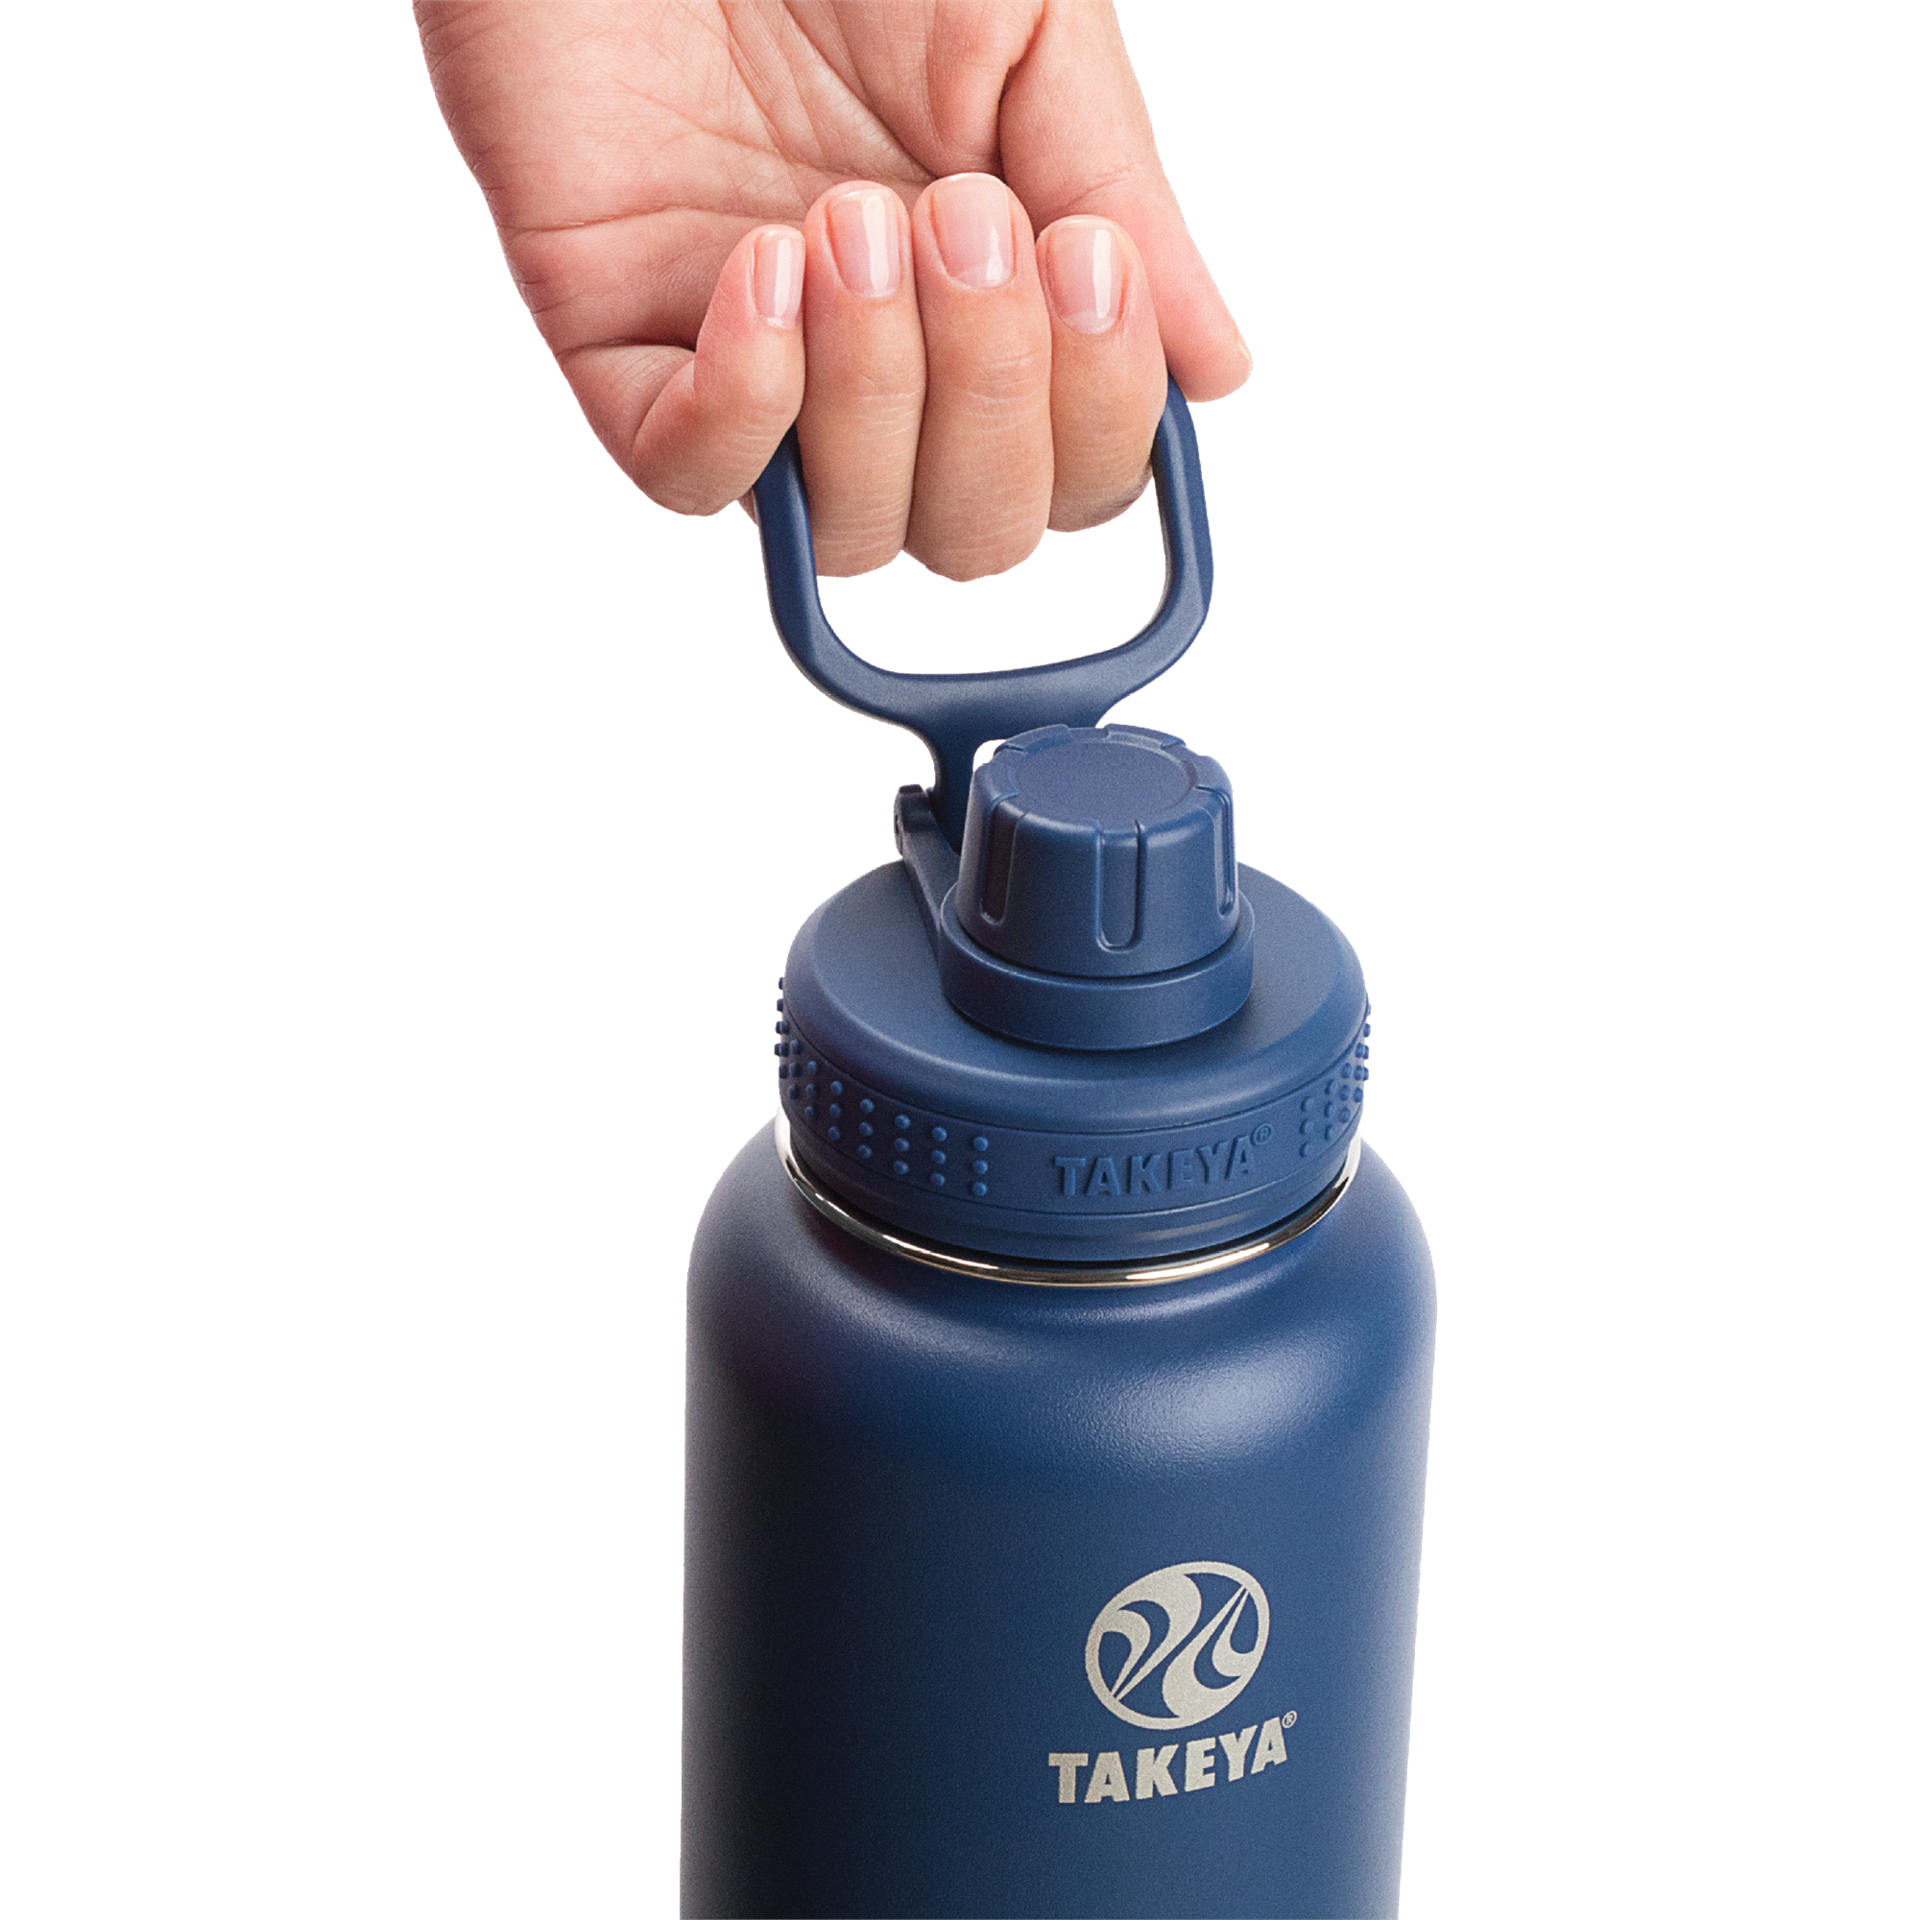 40oz Insulated Water Bottle With Straw, Spout, And Stainless Steel